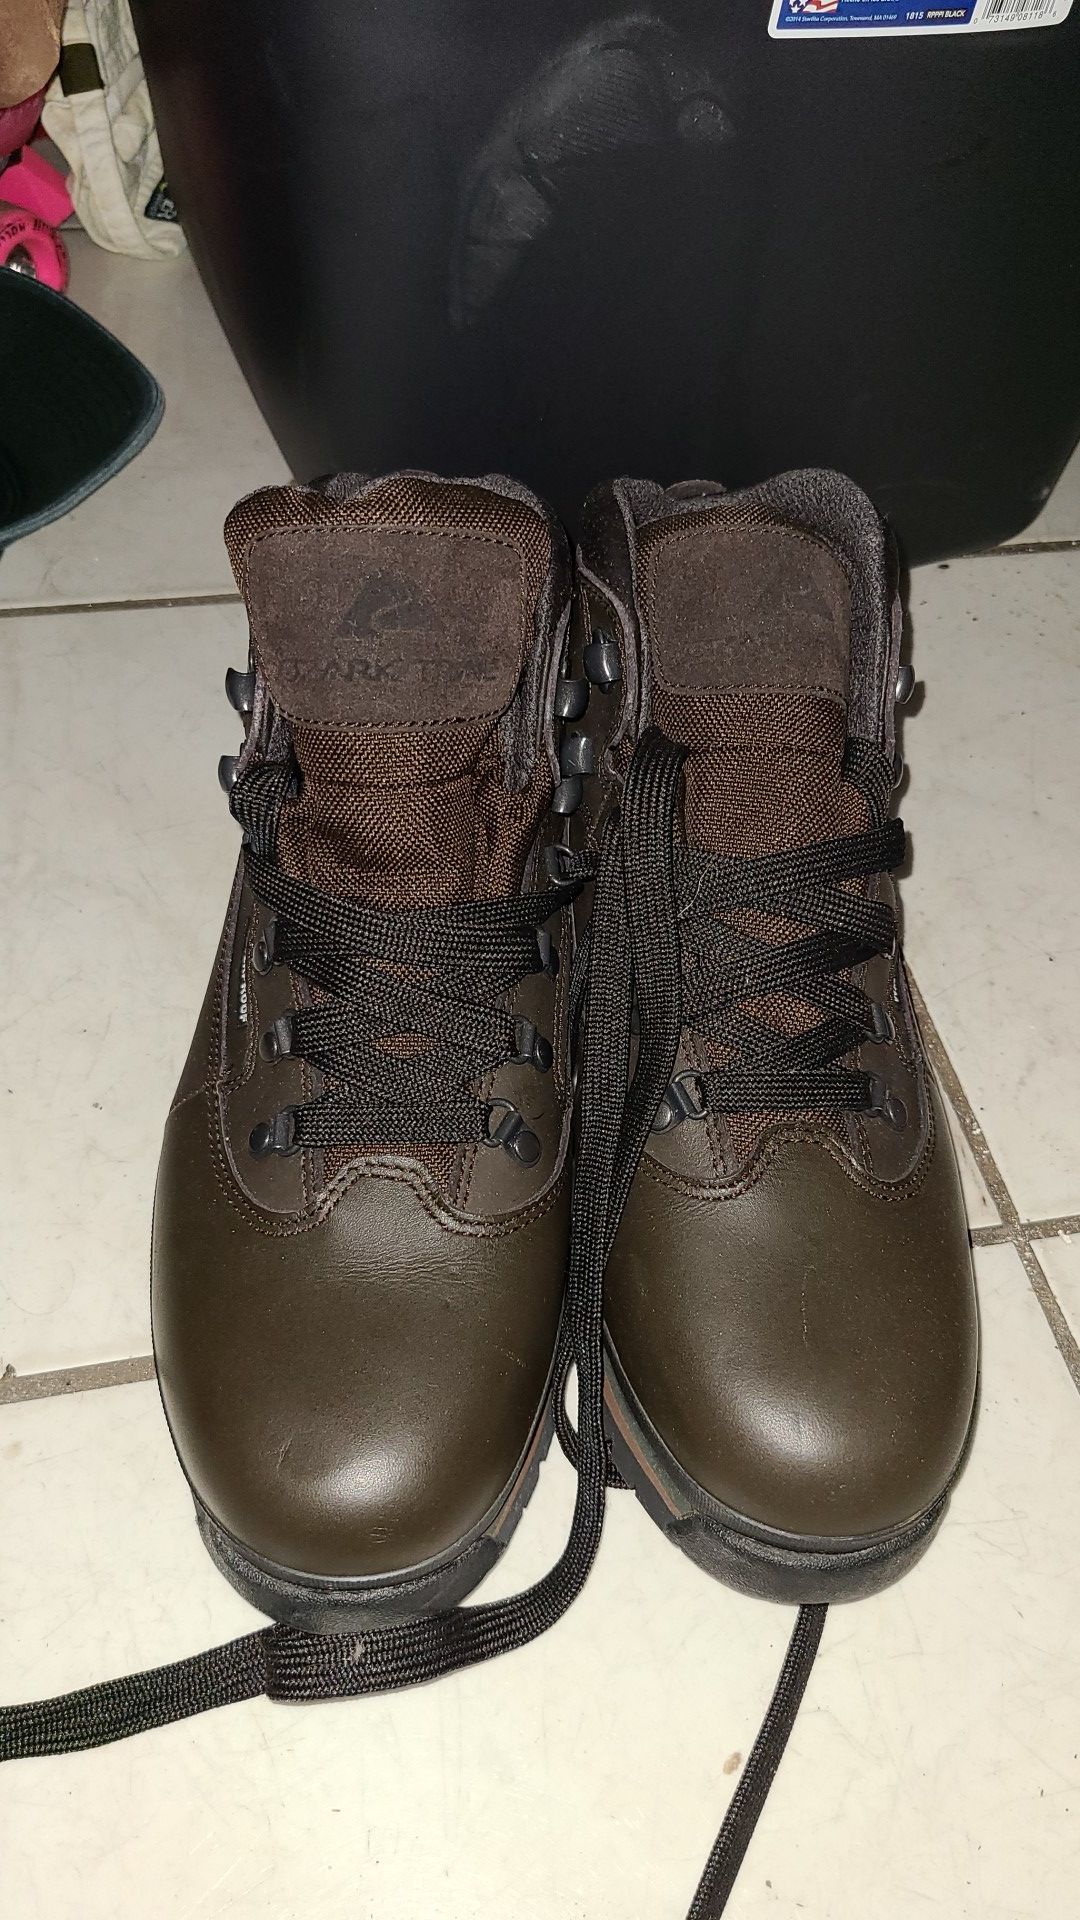 Mens work boots